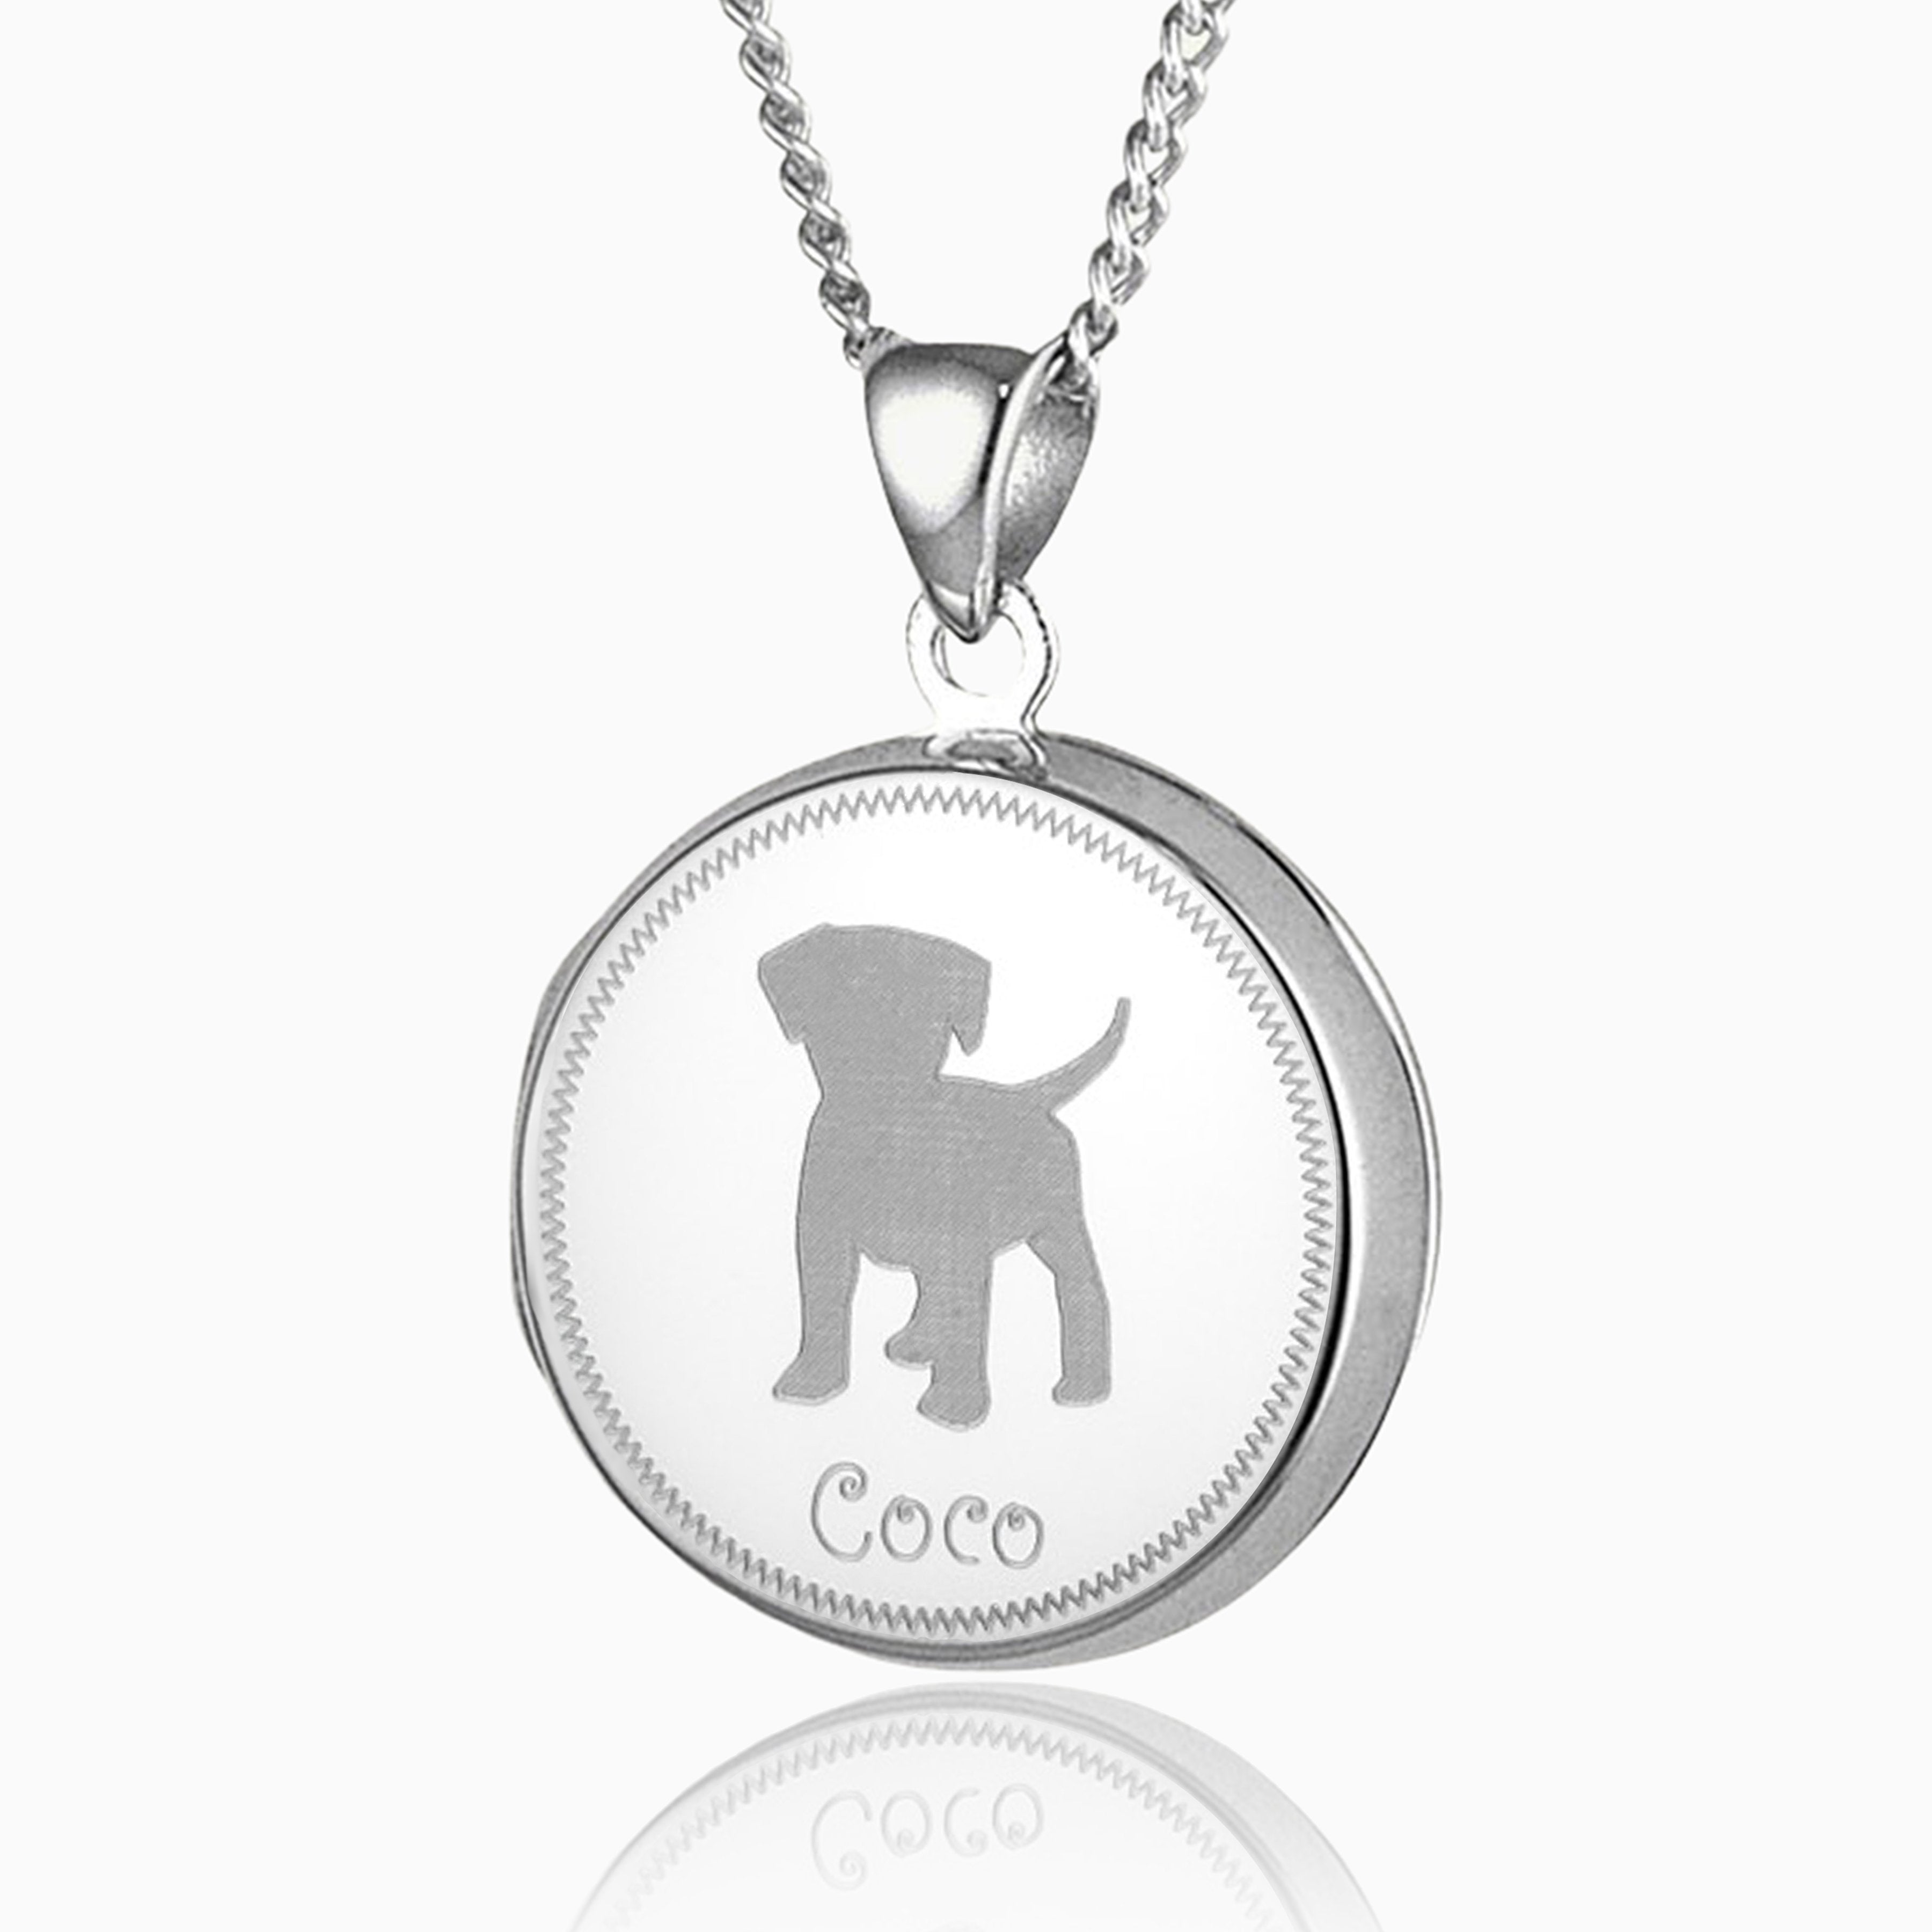 sterling silver round locket with a puppy engraved on the front and the name Coco underneath,  on a sterling silver curb chain